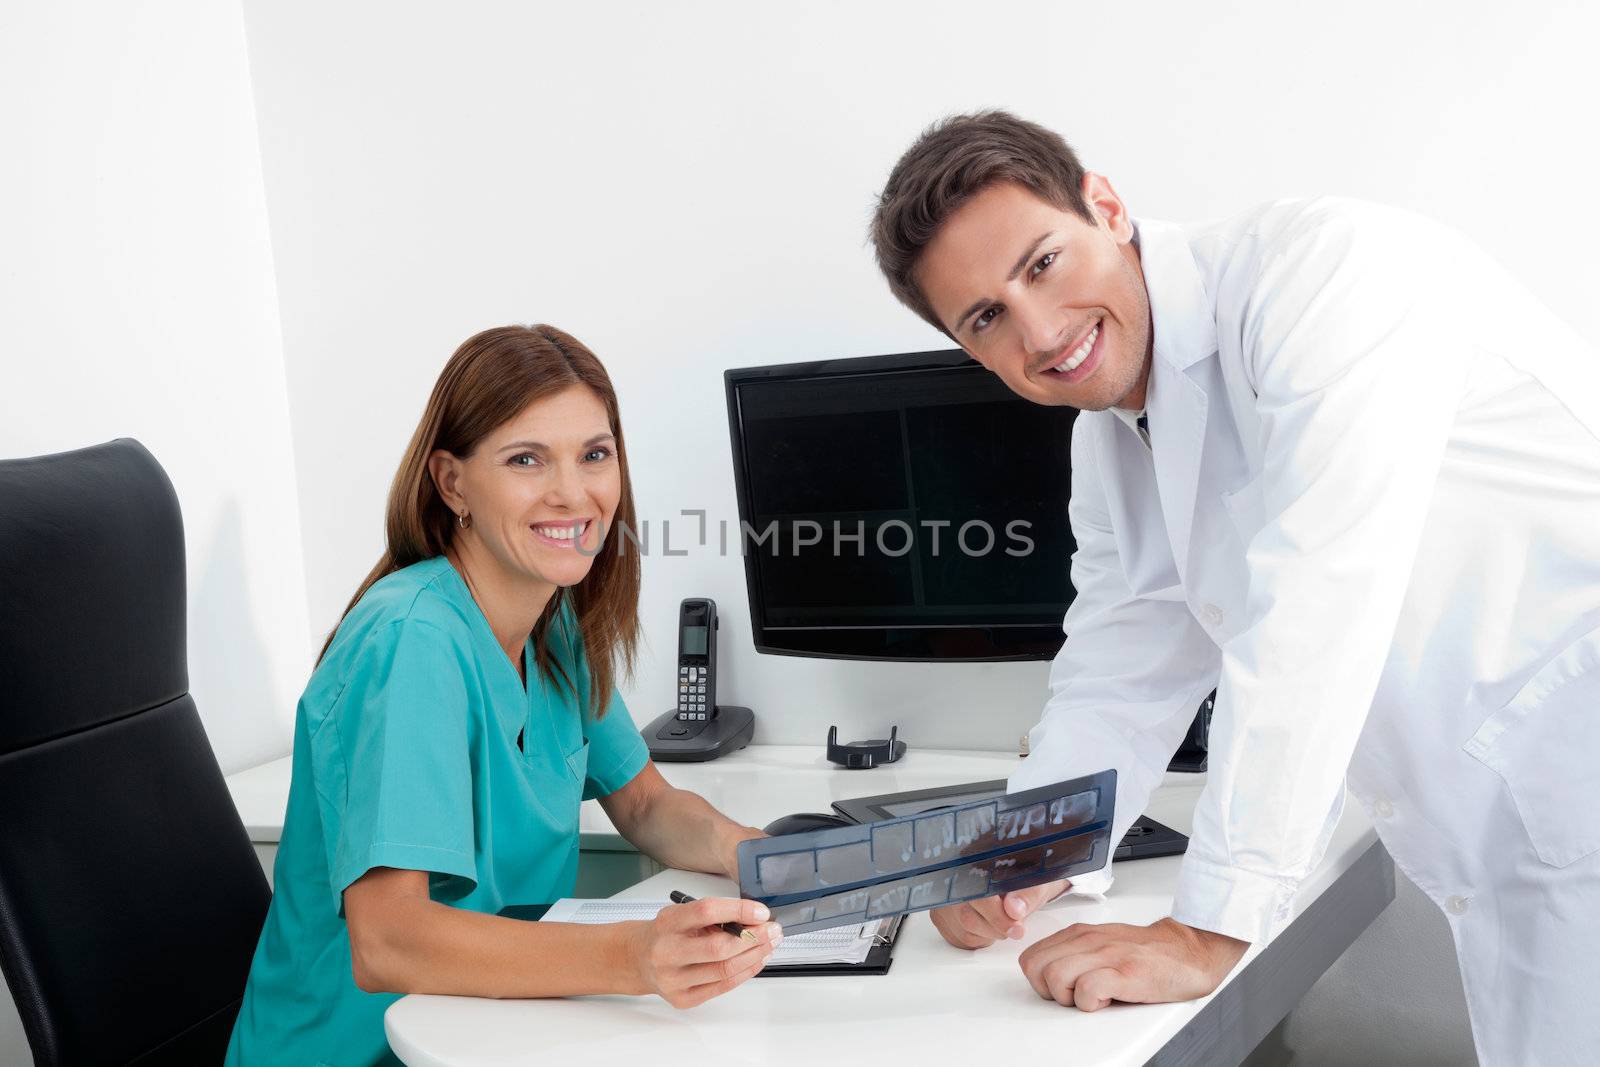 Portrait of happy dentist and female assistant analyzing X-ray report at office desk